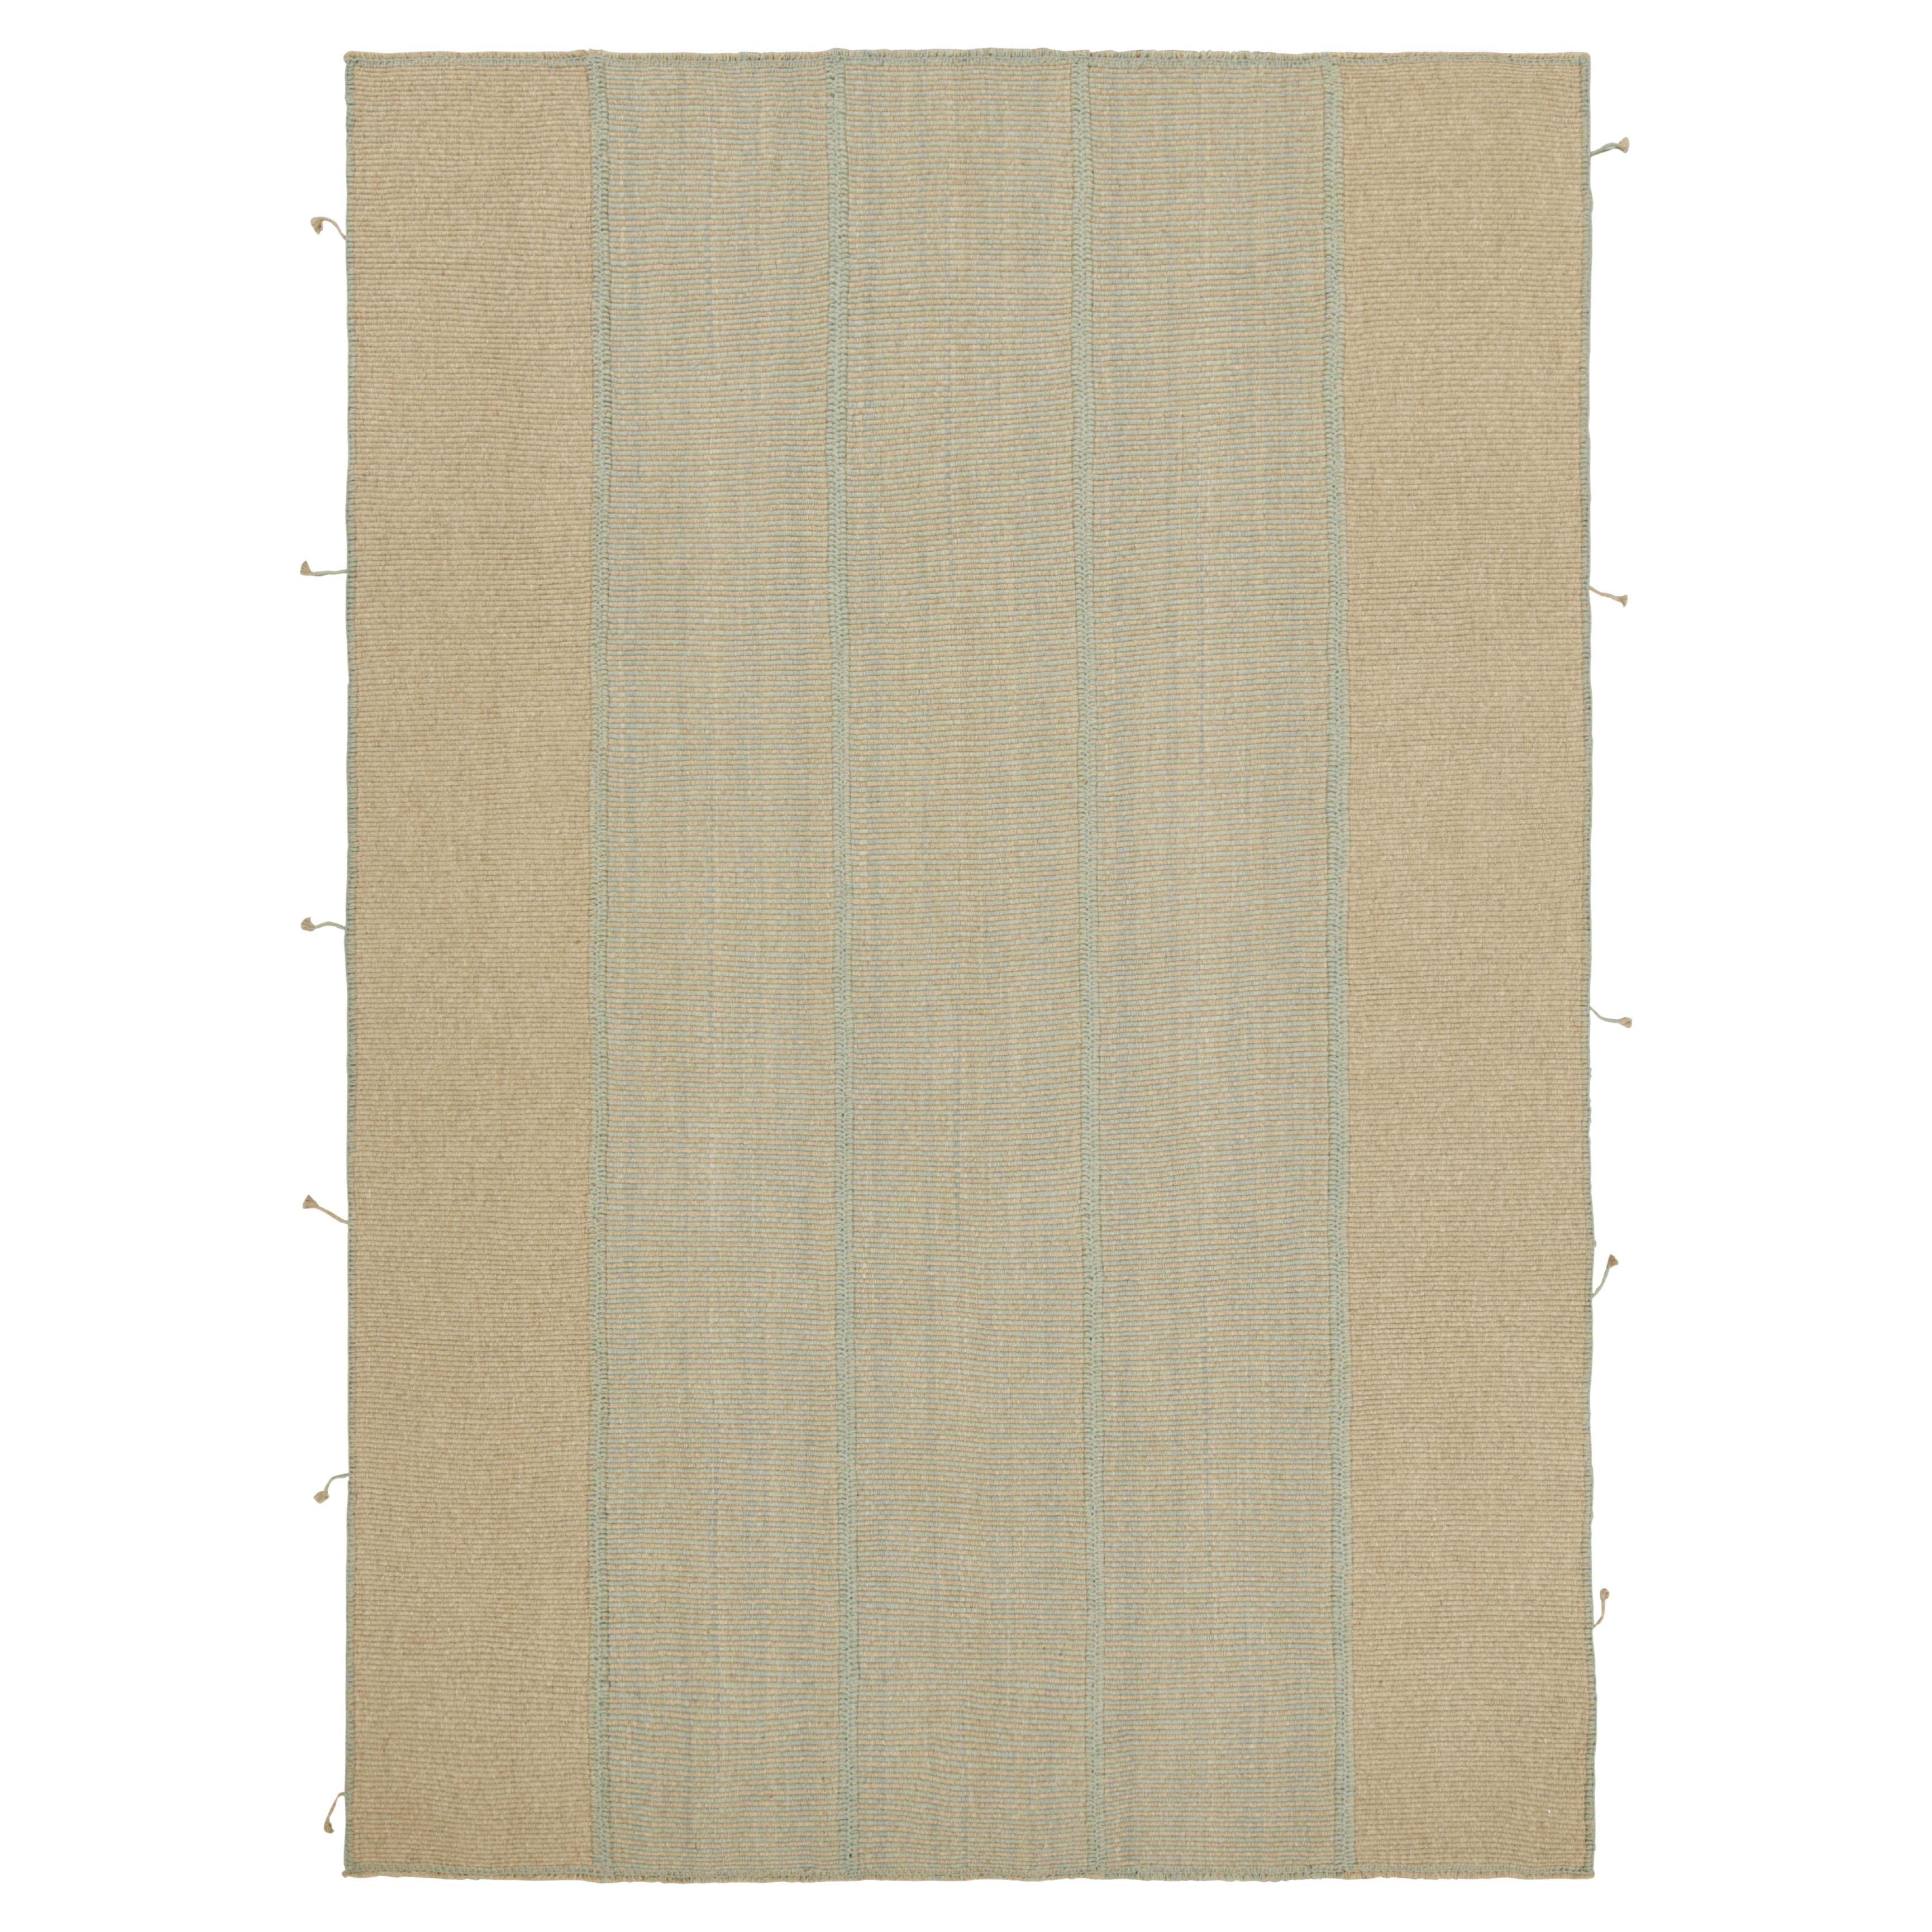 Rug & Kilim’s Contemporary Kilim in Beige and Blue Textural Stripes For Sale